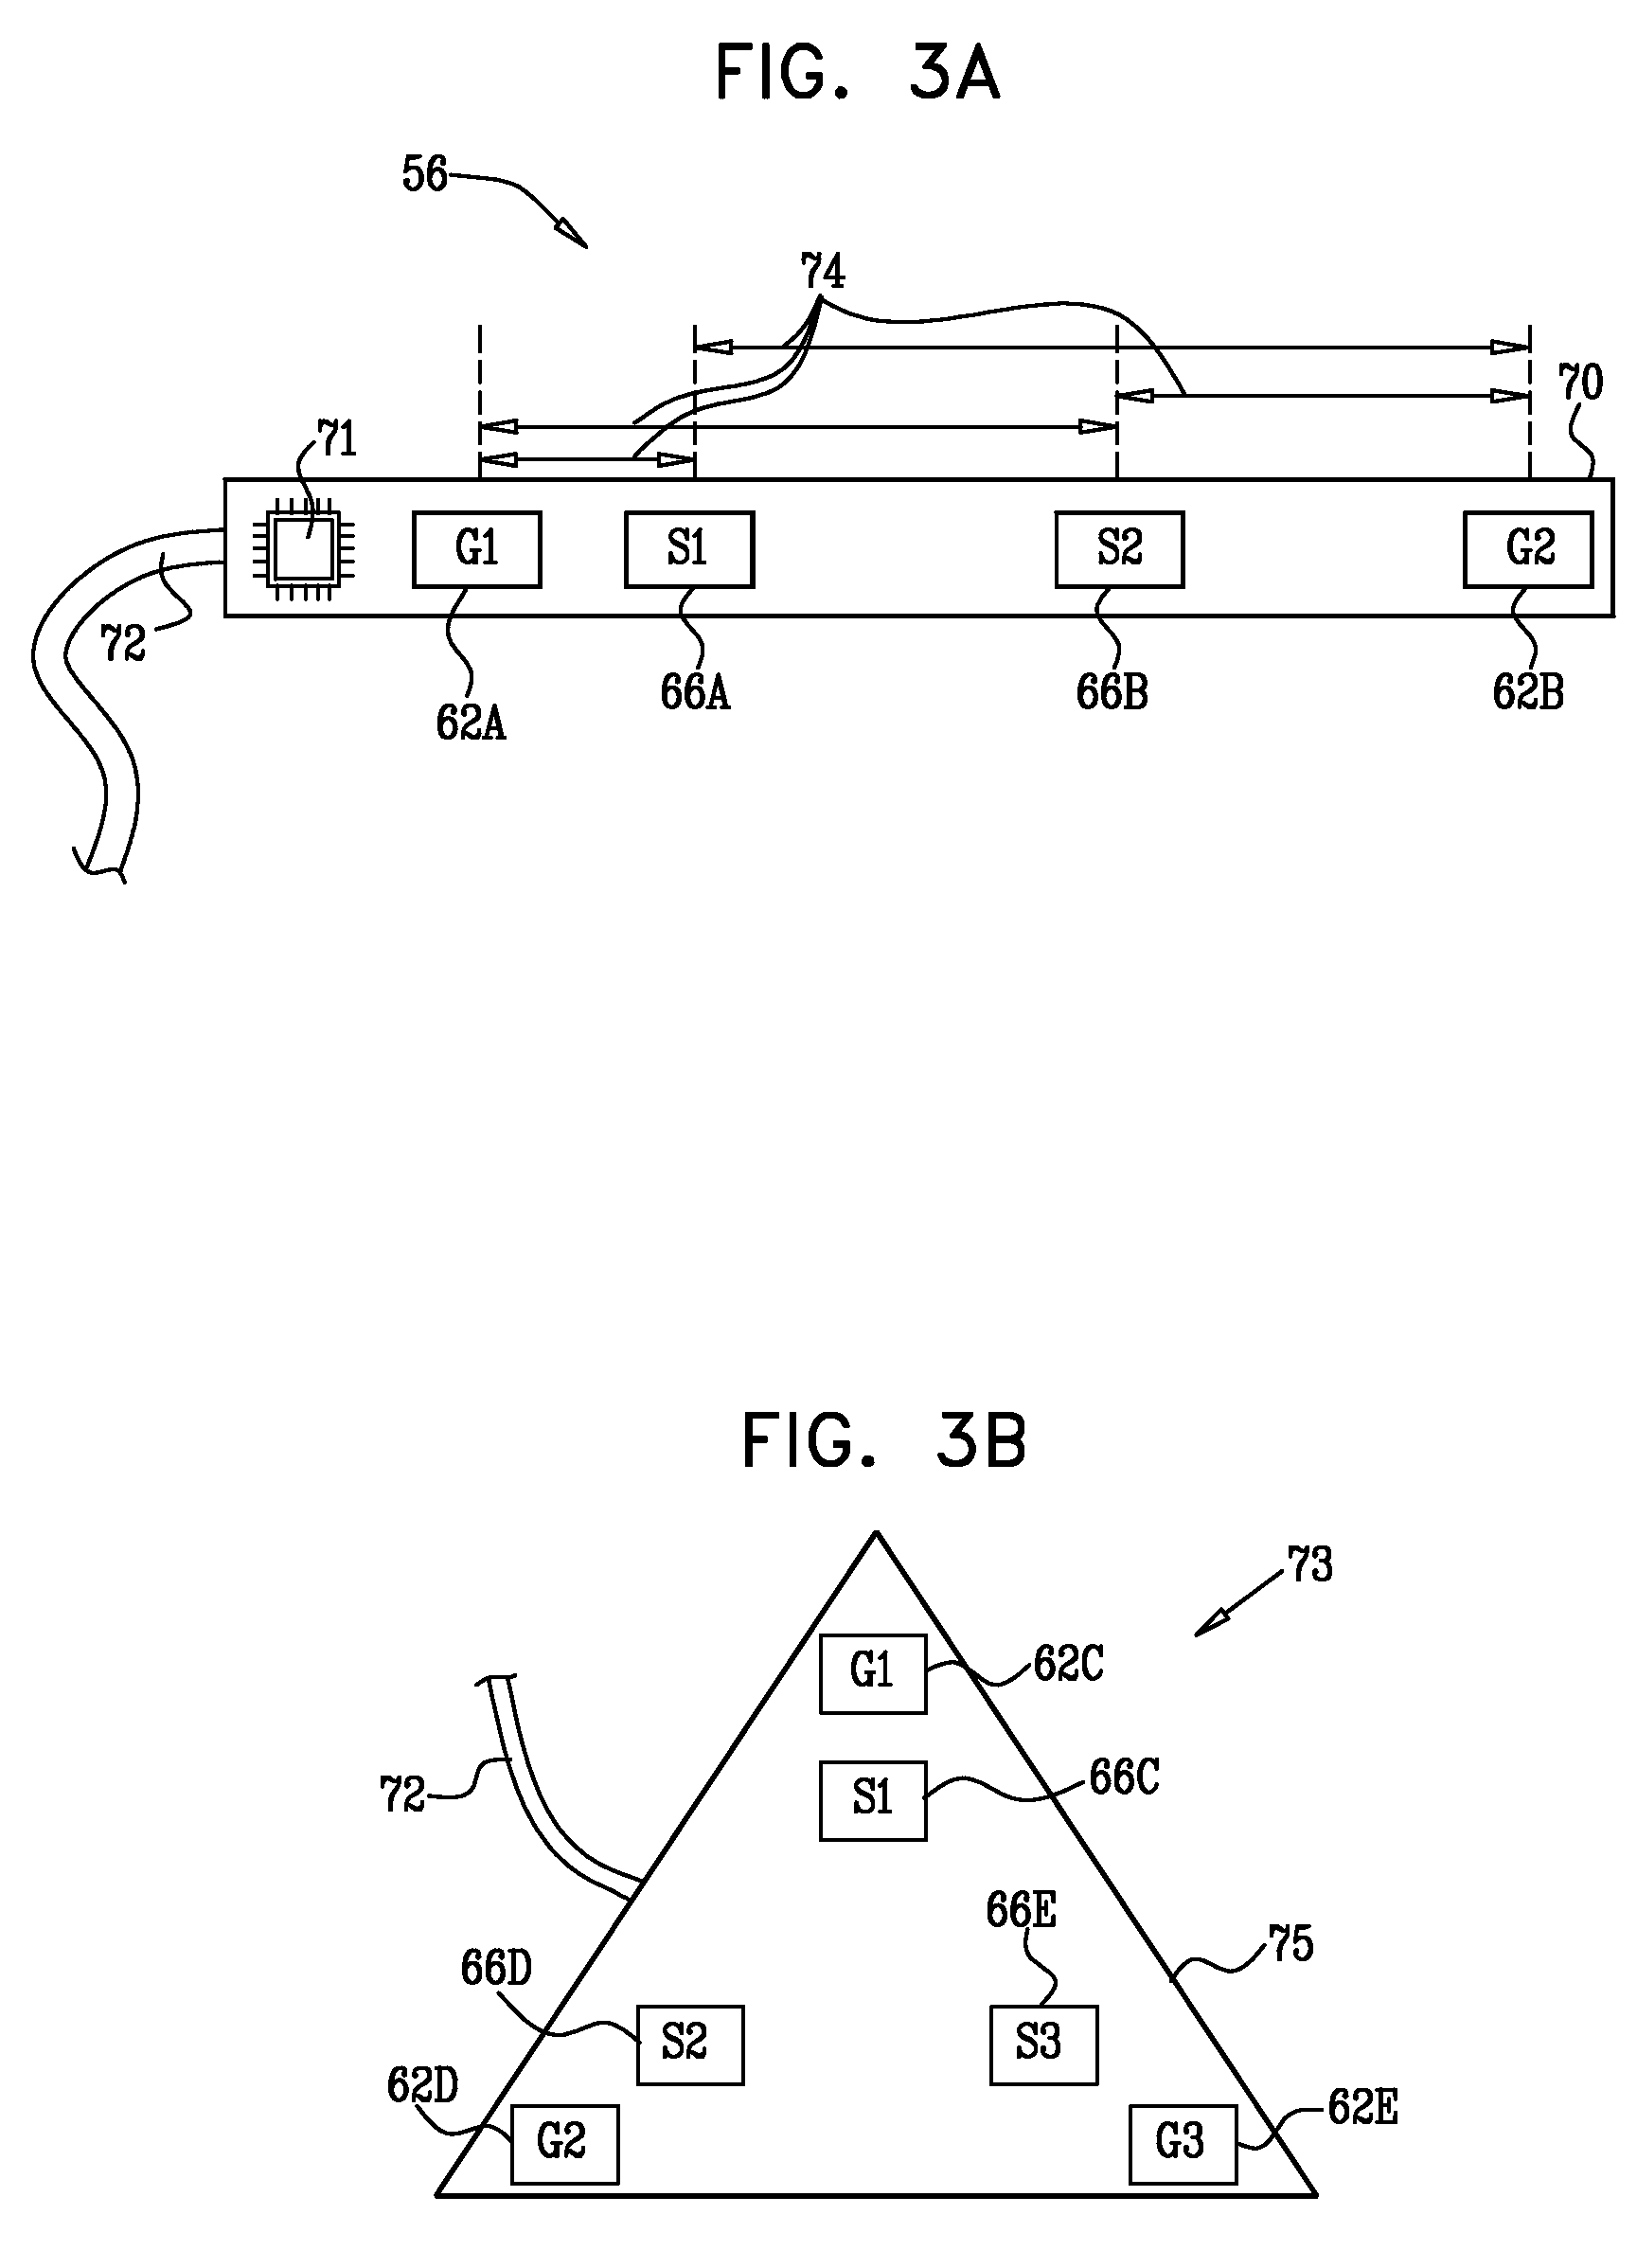 Probe for assessment of metal distortion